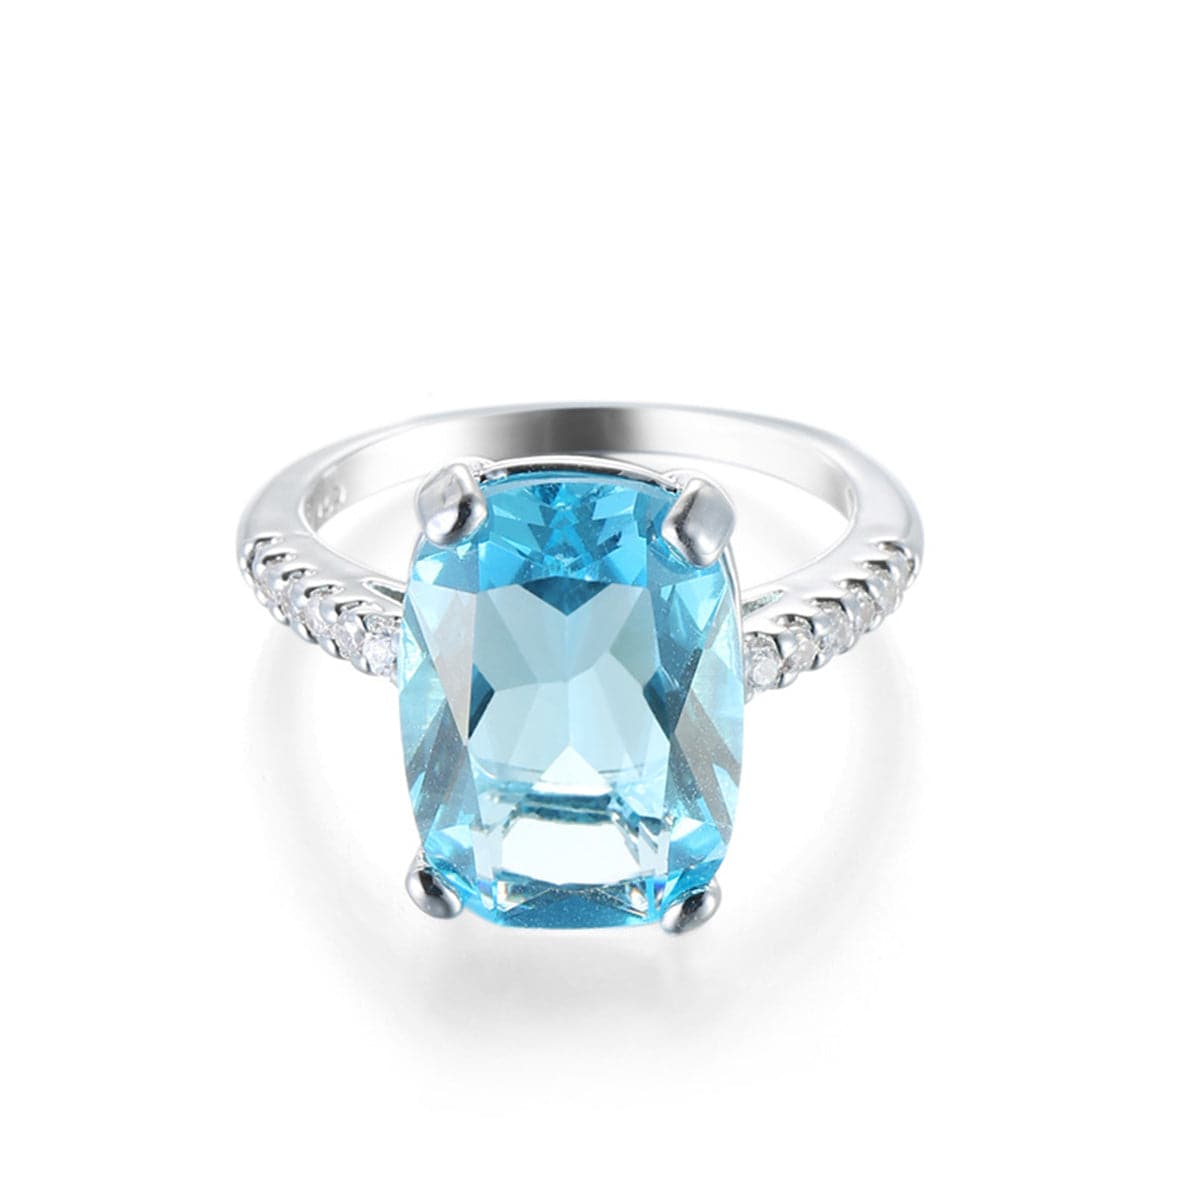 Blue Crystal & Silver-Plated Radiant-Cut Ring